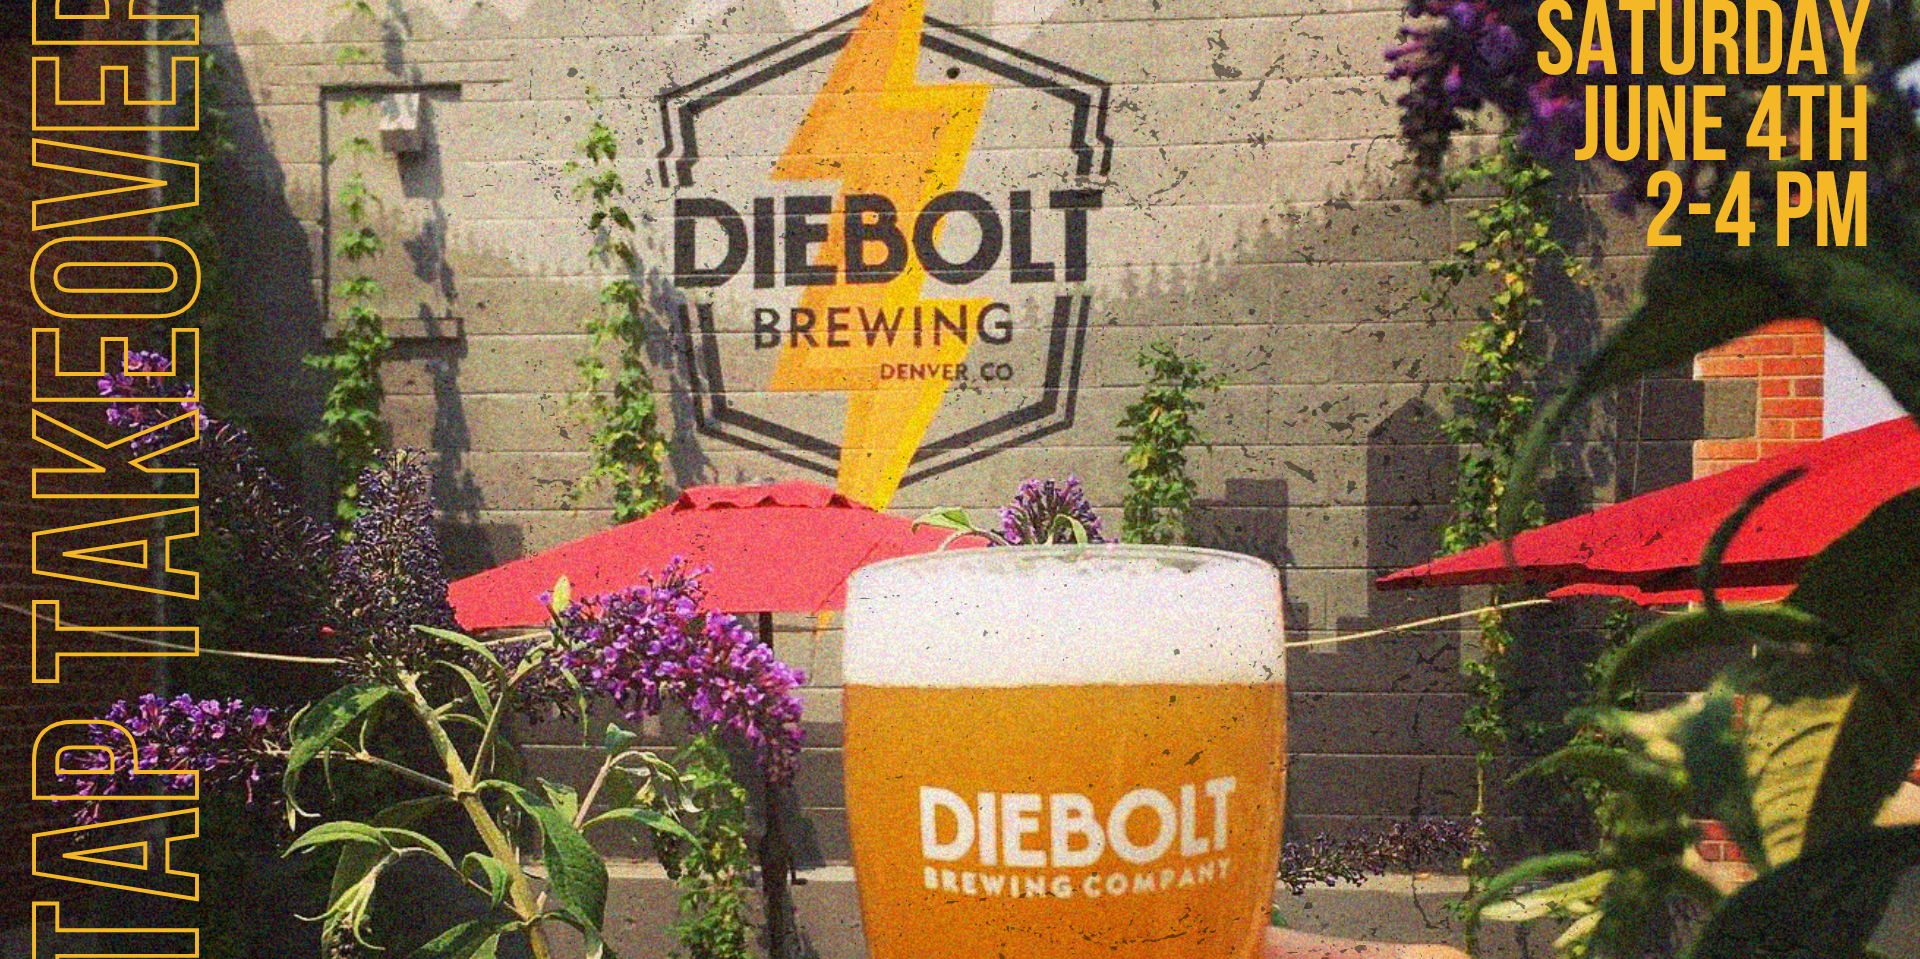 Diebolt Brewing Tap Takeover promotional image